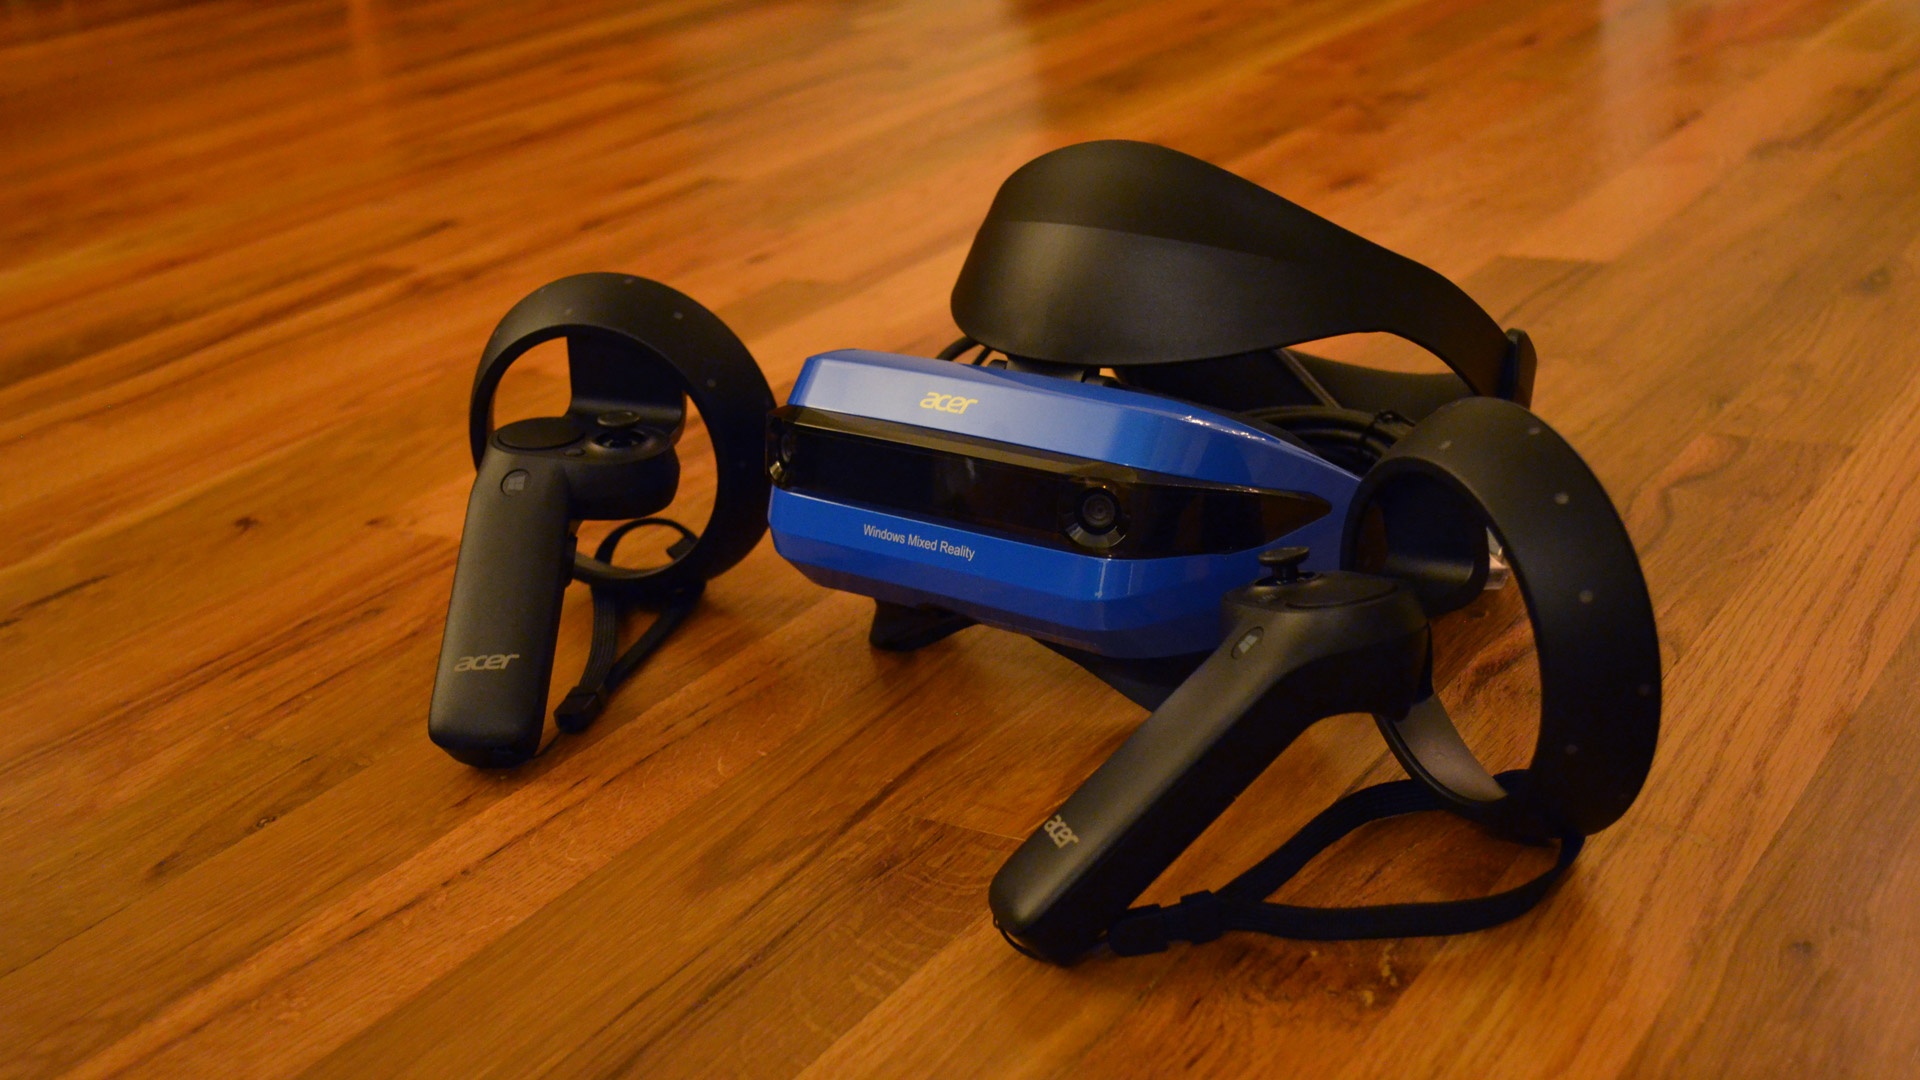 Acer Reality Headset Review